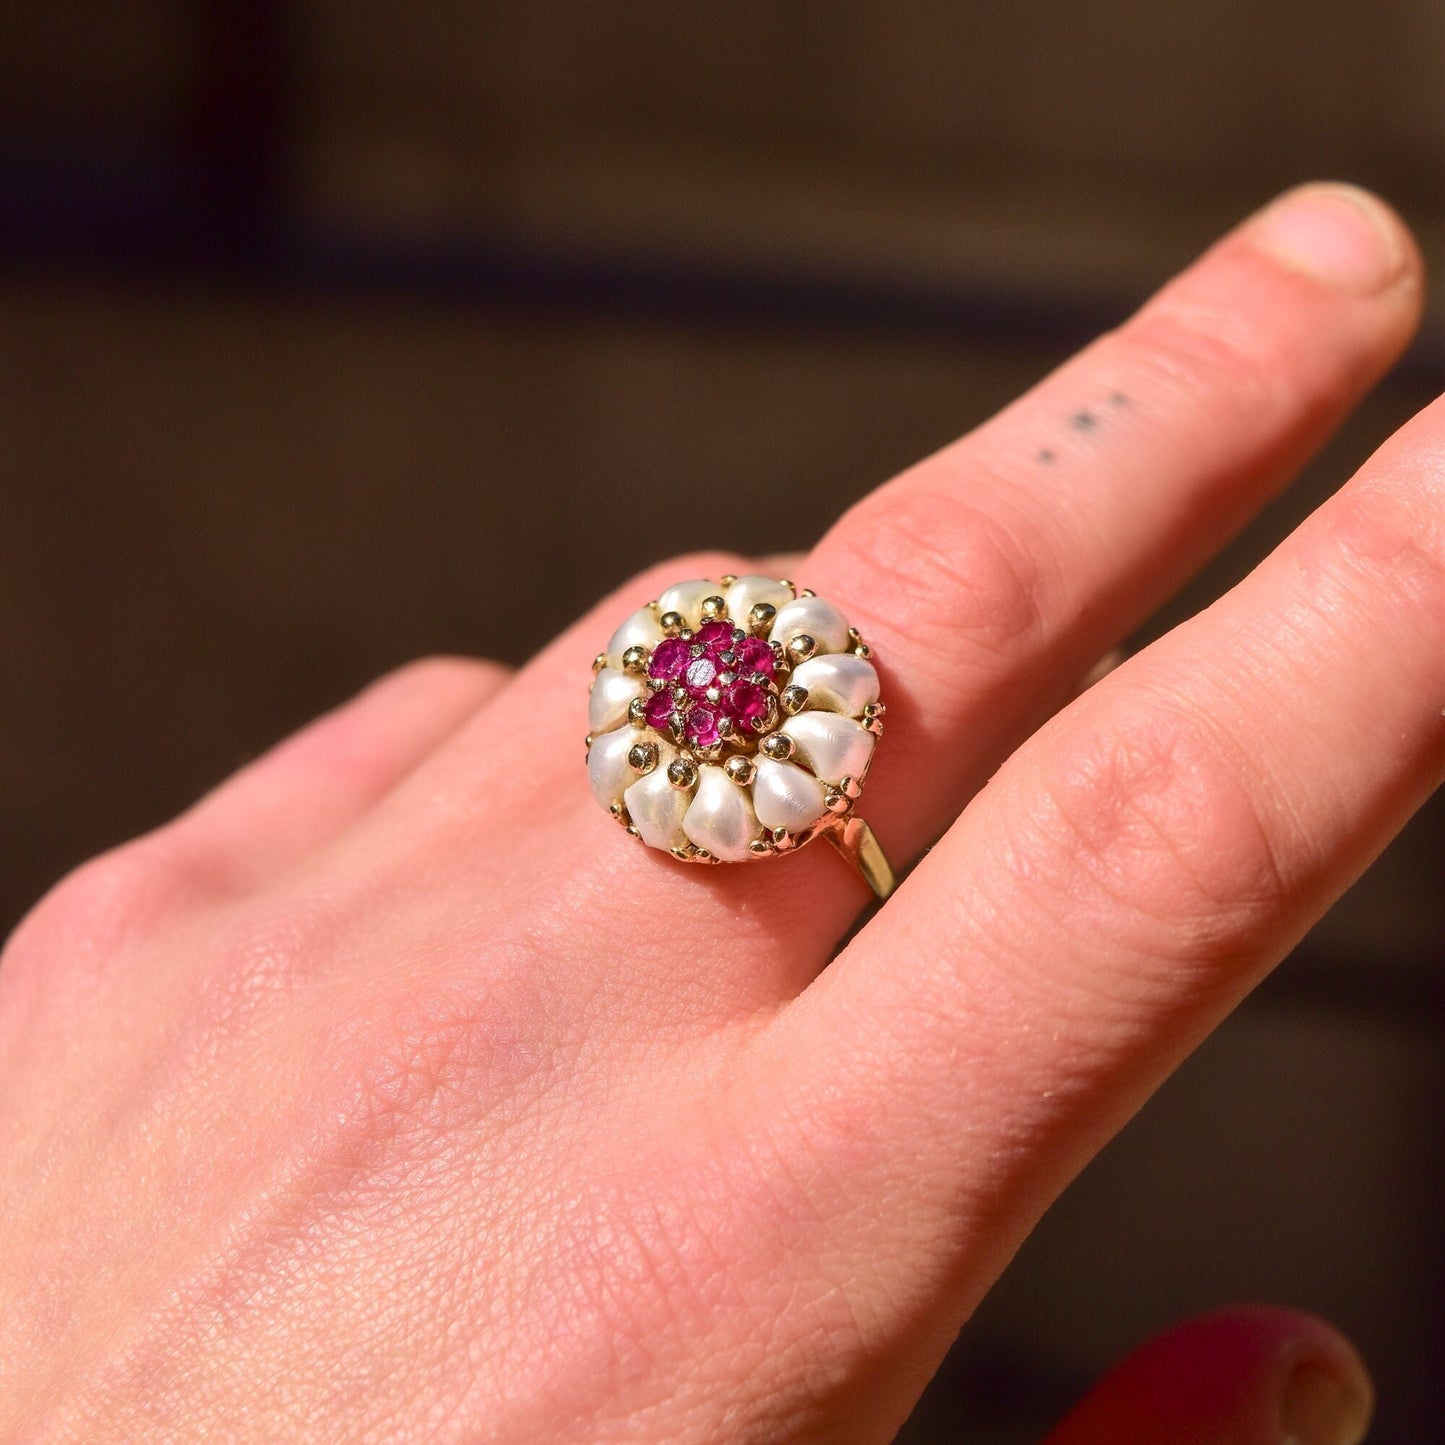 14K yellow gold ring featuring a round cluster of white pearls and pink rubies in a domed floral design, shown on a hand, estate jewelry, size 9 US.